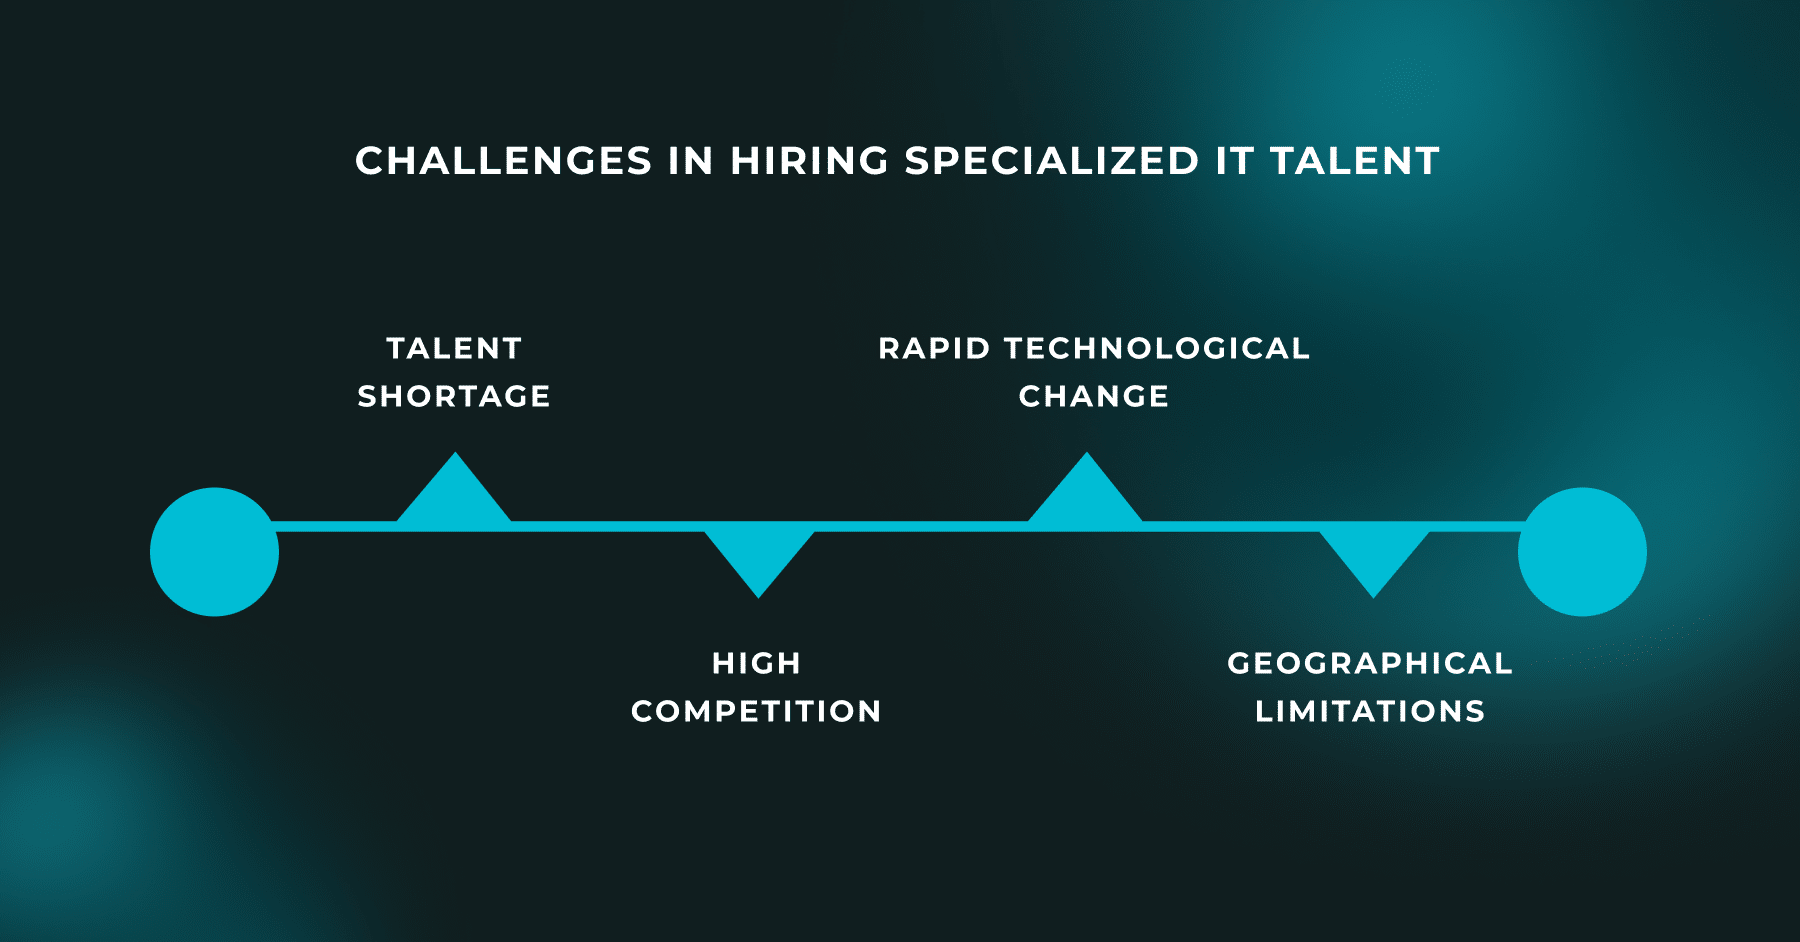 Challenges in Hiring Specialized IT Talent